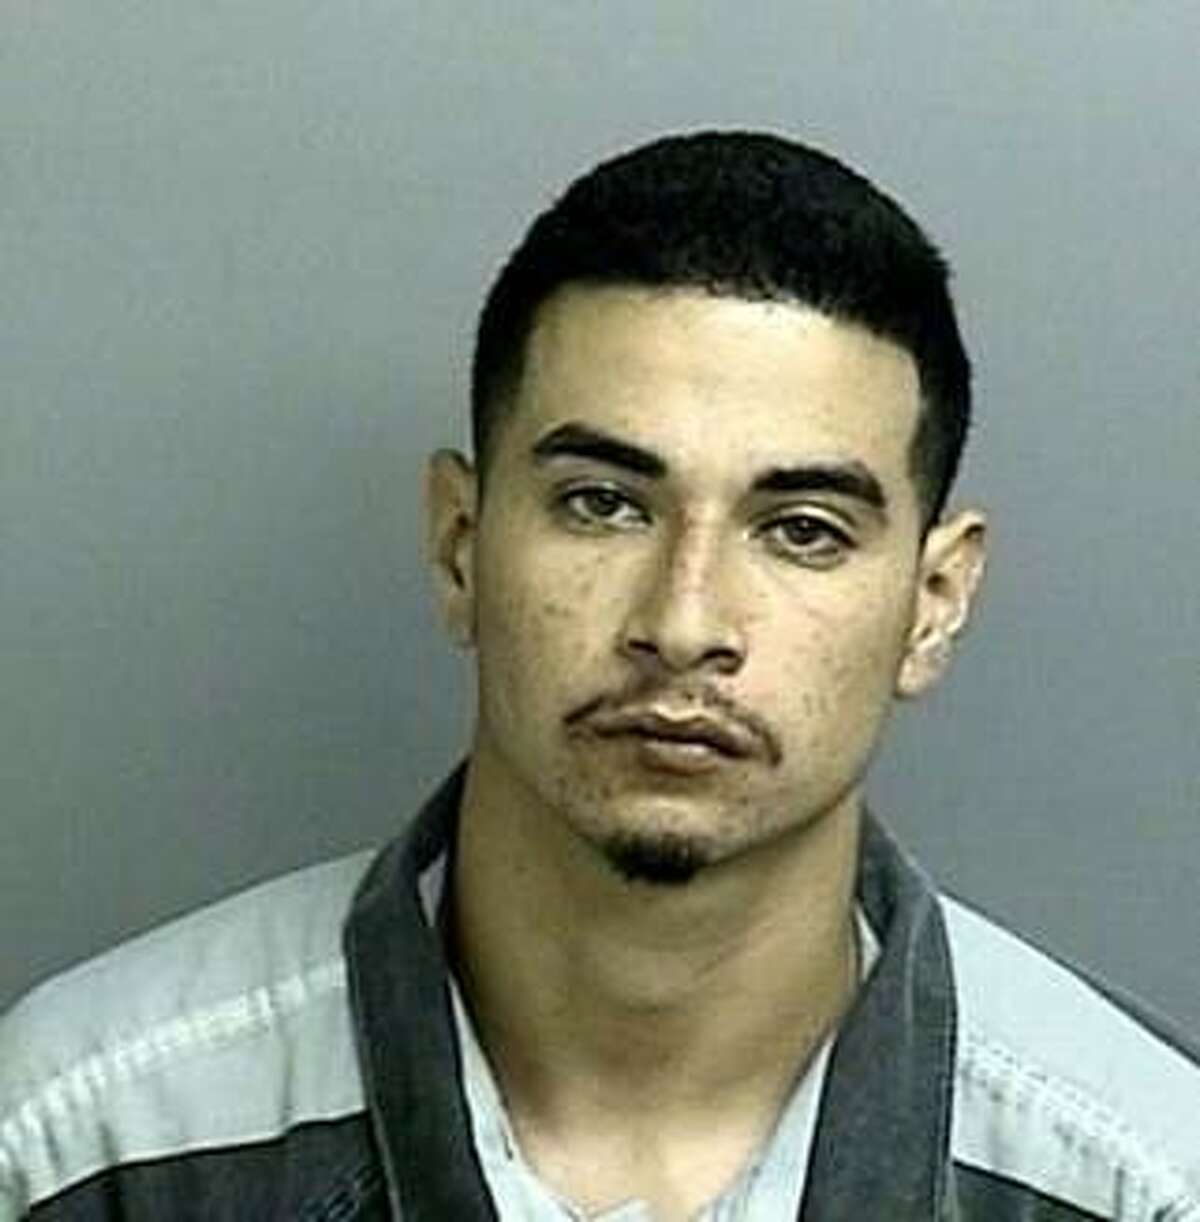 Alejandro Guzman-Lopez, a laborer, was sentenced in Montgomery County to 40 years in prison on March 23, 2016 after he was convicted of intoxication manslaughter and failure to stop and render aid stemming from a May 17, 2015 crash that killed a Splendora firefighter and his wife and injured their two young children. 